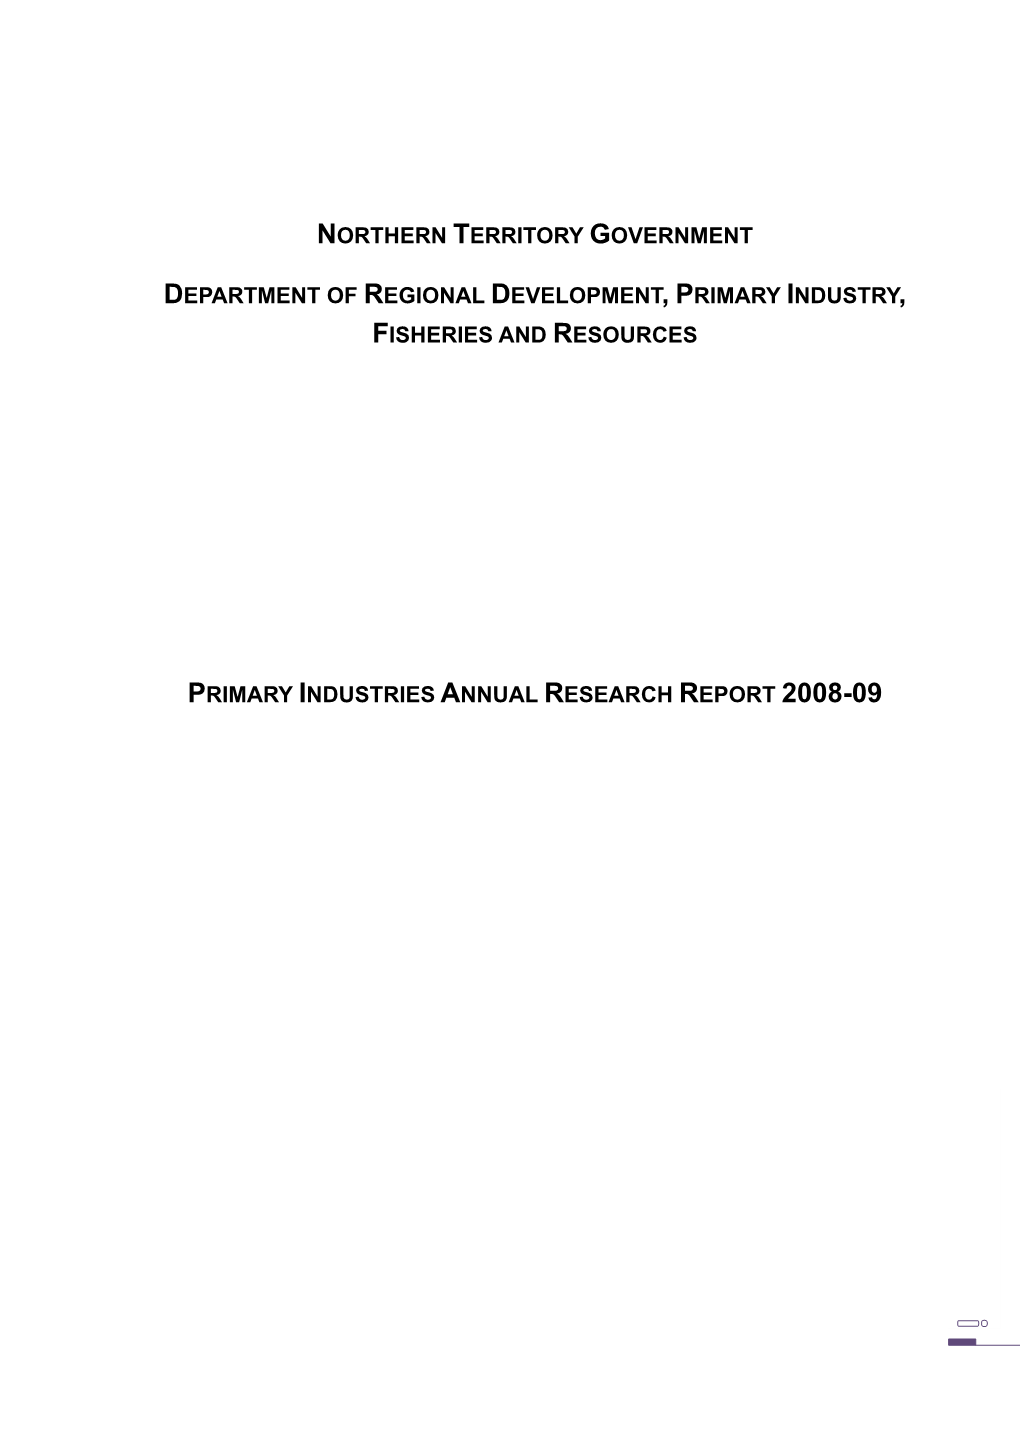 Northern Territory Government Department of Regional Development, Primary Industry, Fisheries and Resources GPO Box 3000 Darwin NT 0801